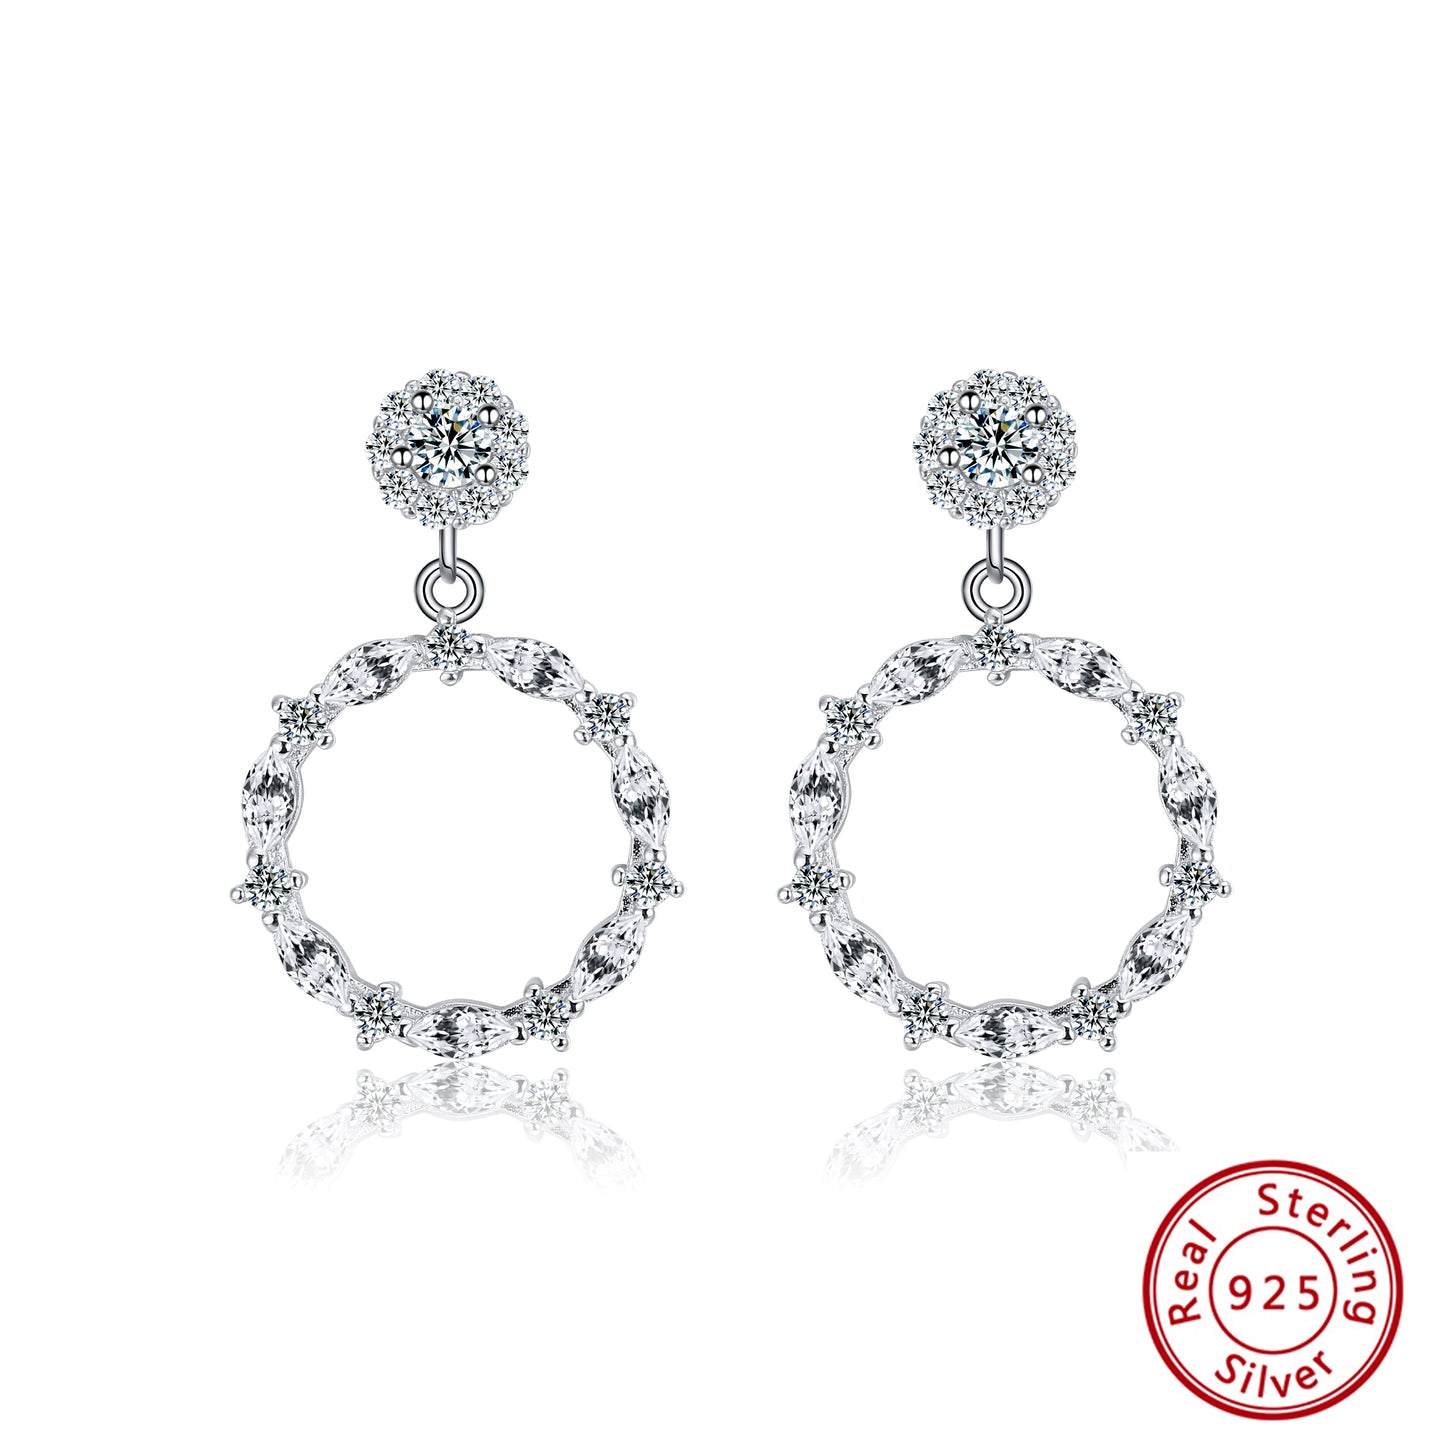 rhodium plated round design earrings, silver sterling round design earrings